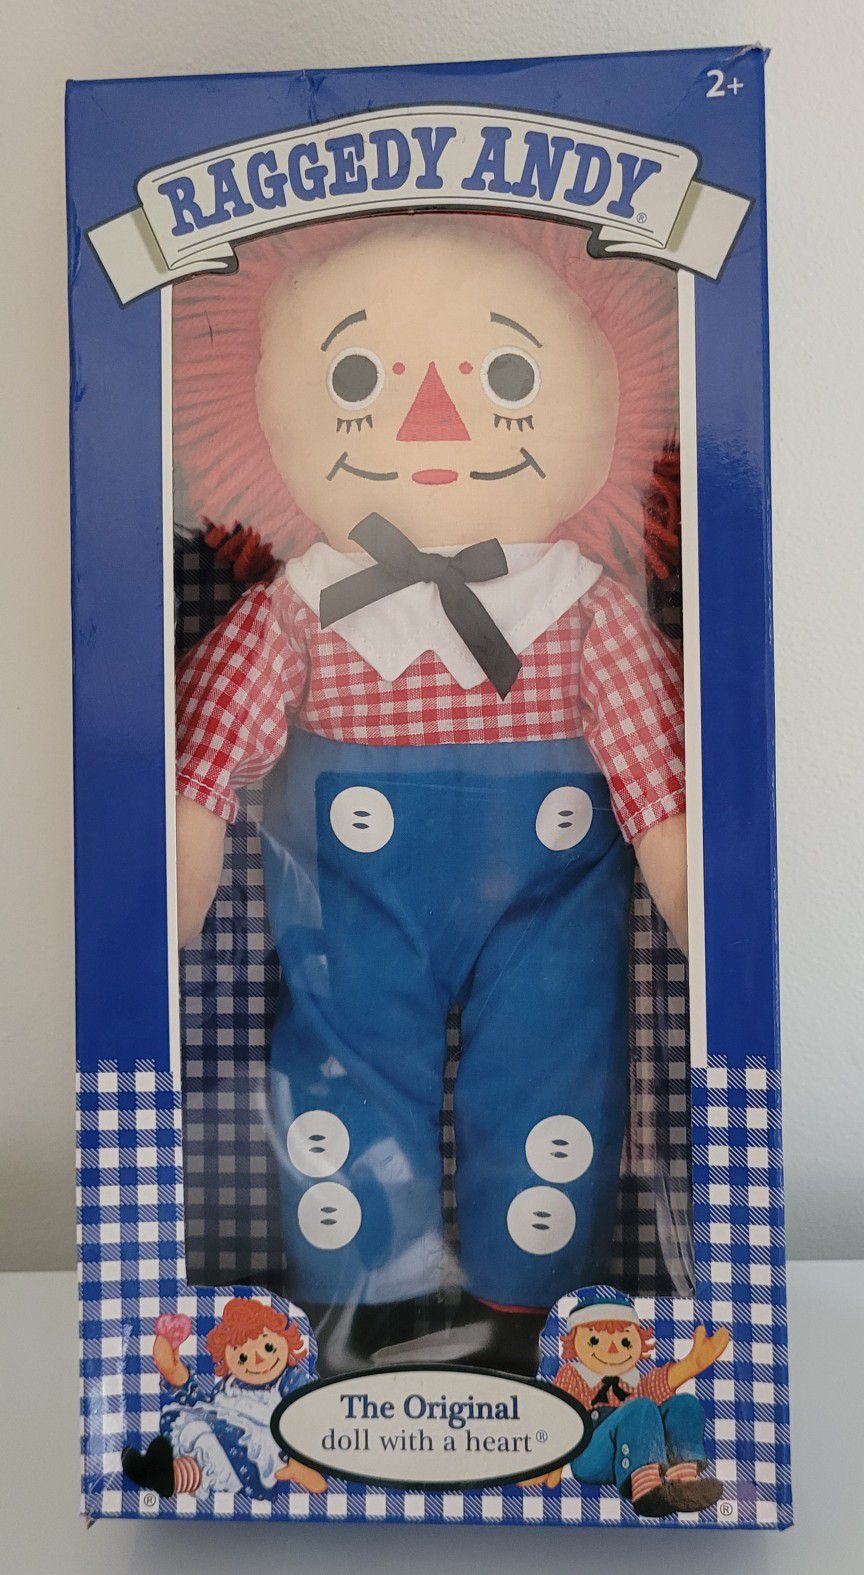 Playskool Raggedy Andy Doll The Original Doll With A Heart 